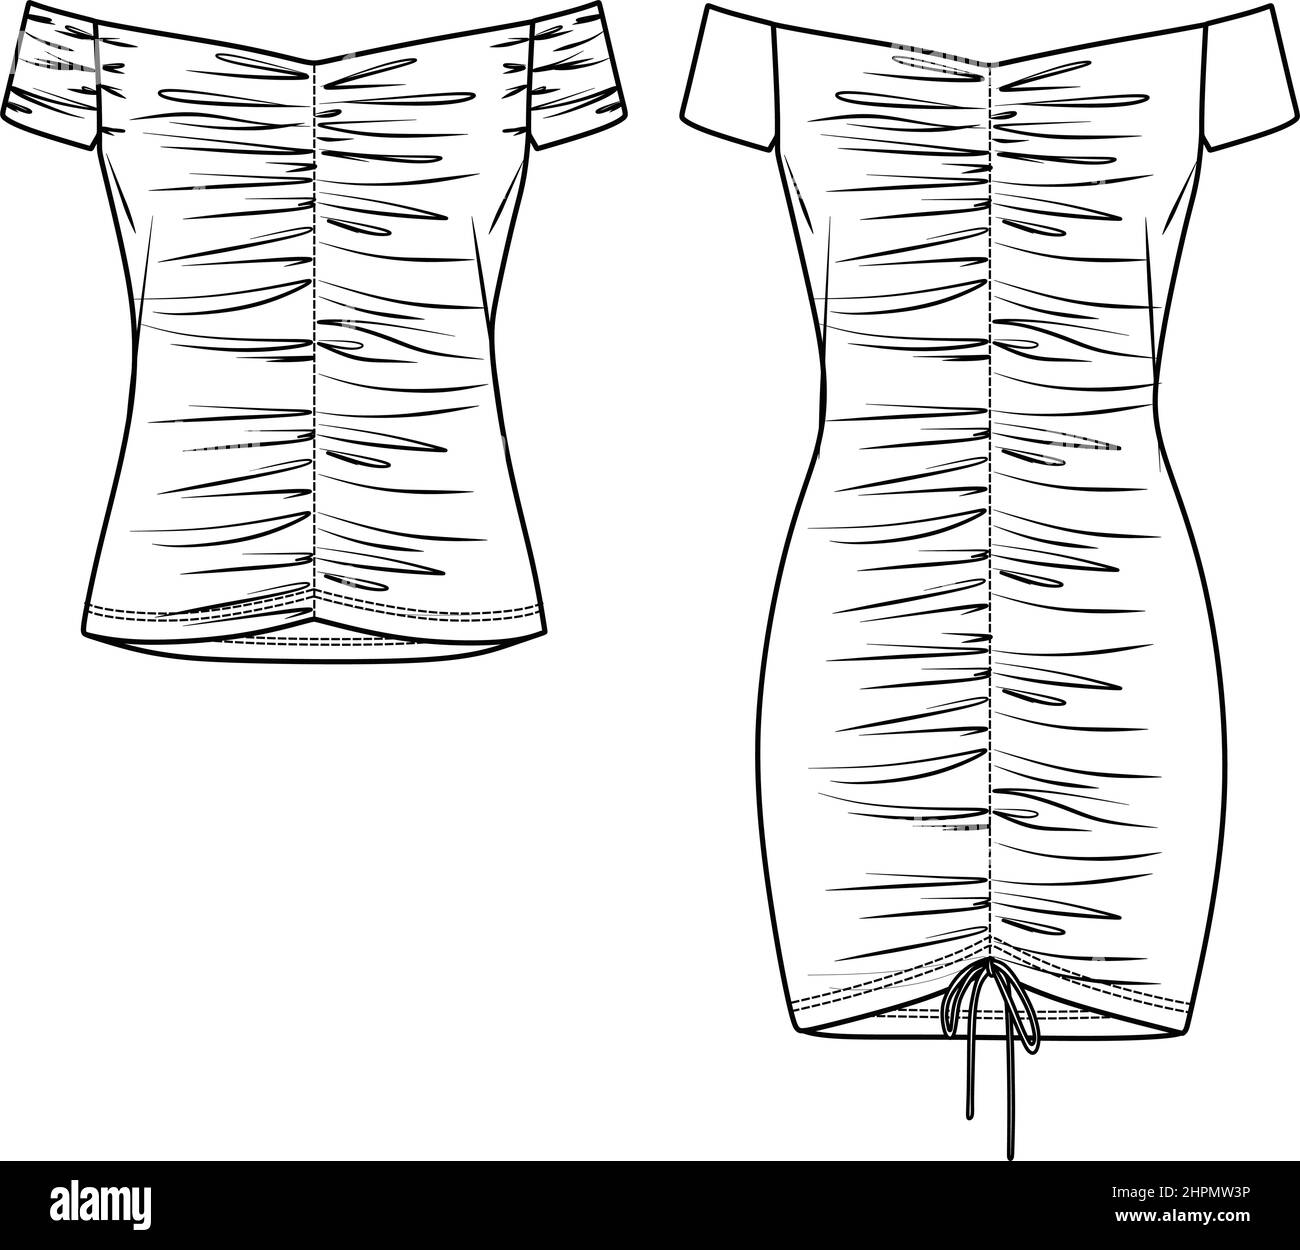 https://c8.alamy.com/comp/2HPMW3P/vector-woman-summer-dress-with-gathered-front-and-sleeves-fashion-cad-off-shoulder-dress-technical-drawing-template-flat-sketch-jersey-or-woven-f-2HPMW3P.jpg